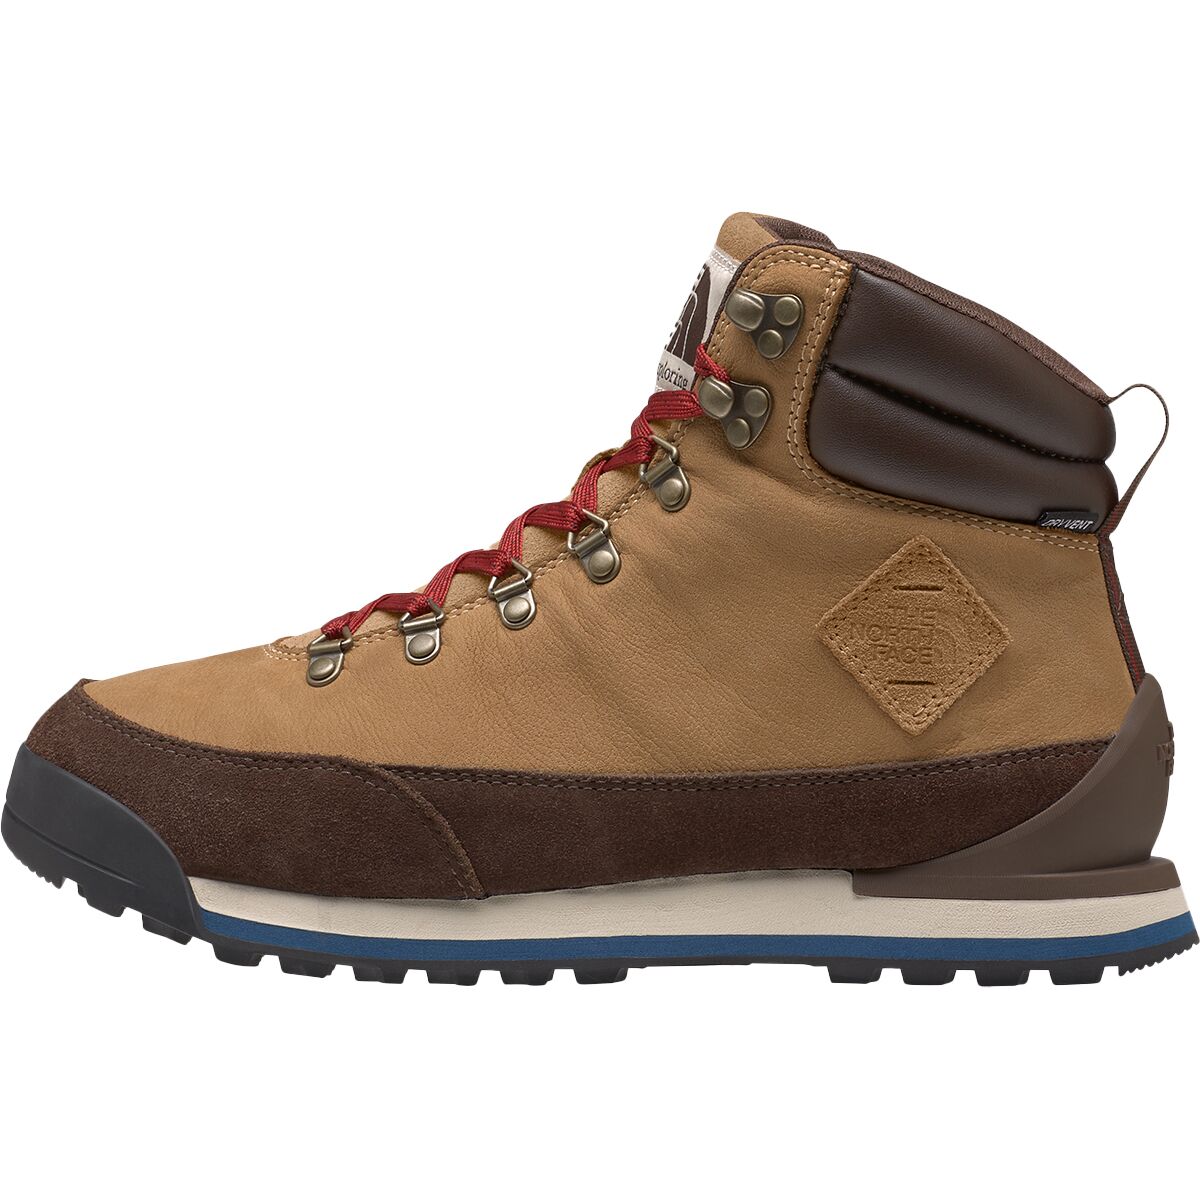 The North Face Back-To-Berkeley IV Leather WP Boot - Men's